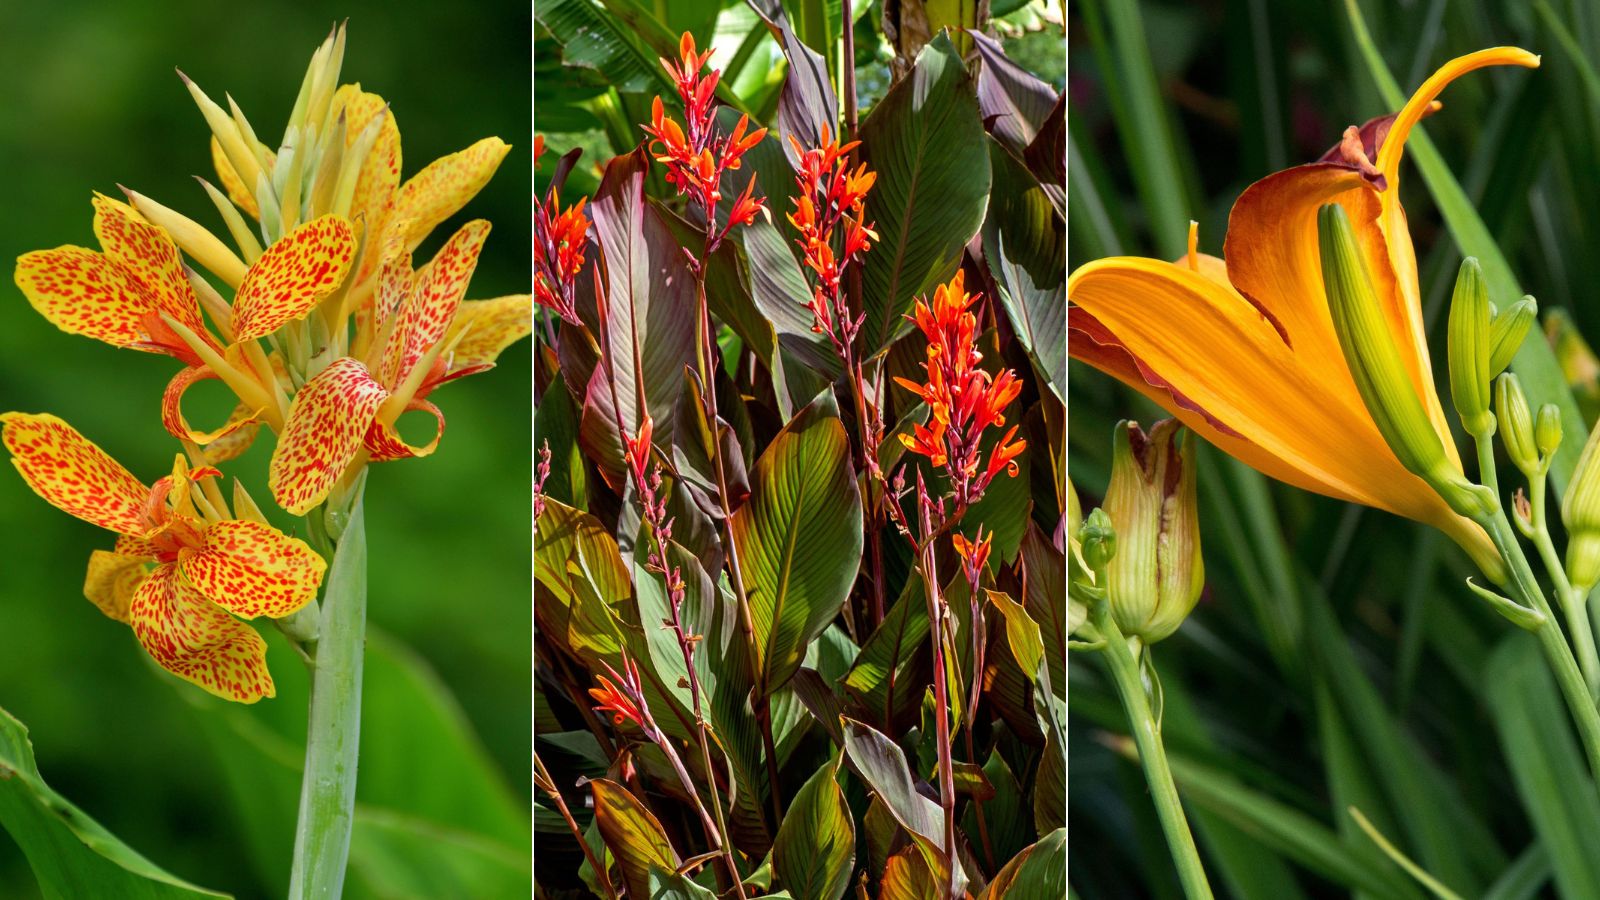 Expert Tips to Grow and Care for Canna Lily